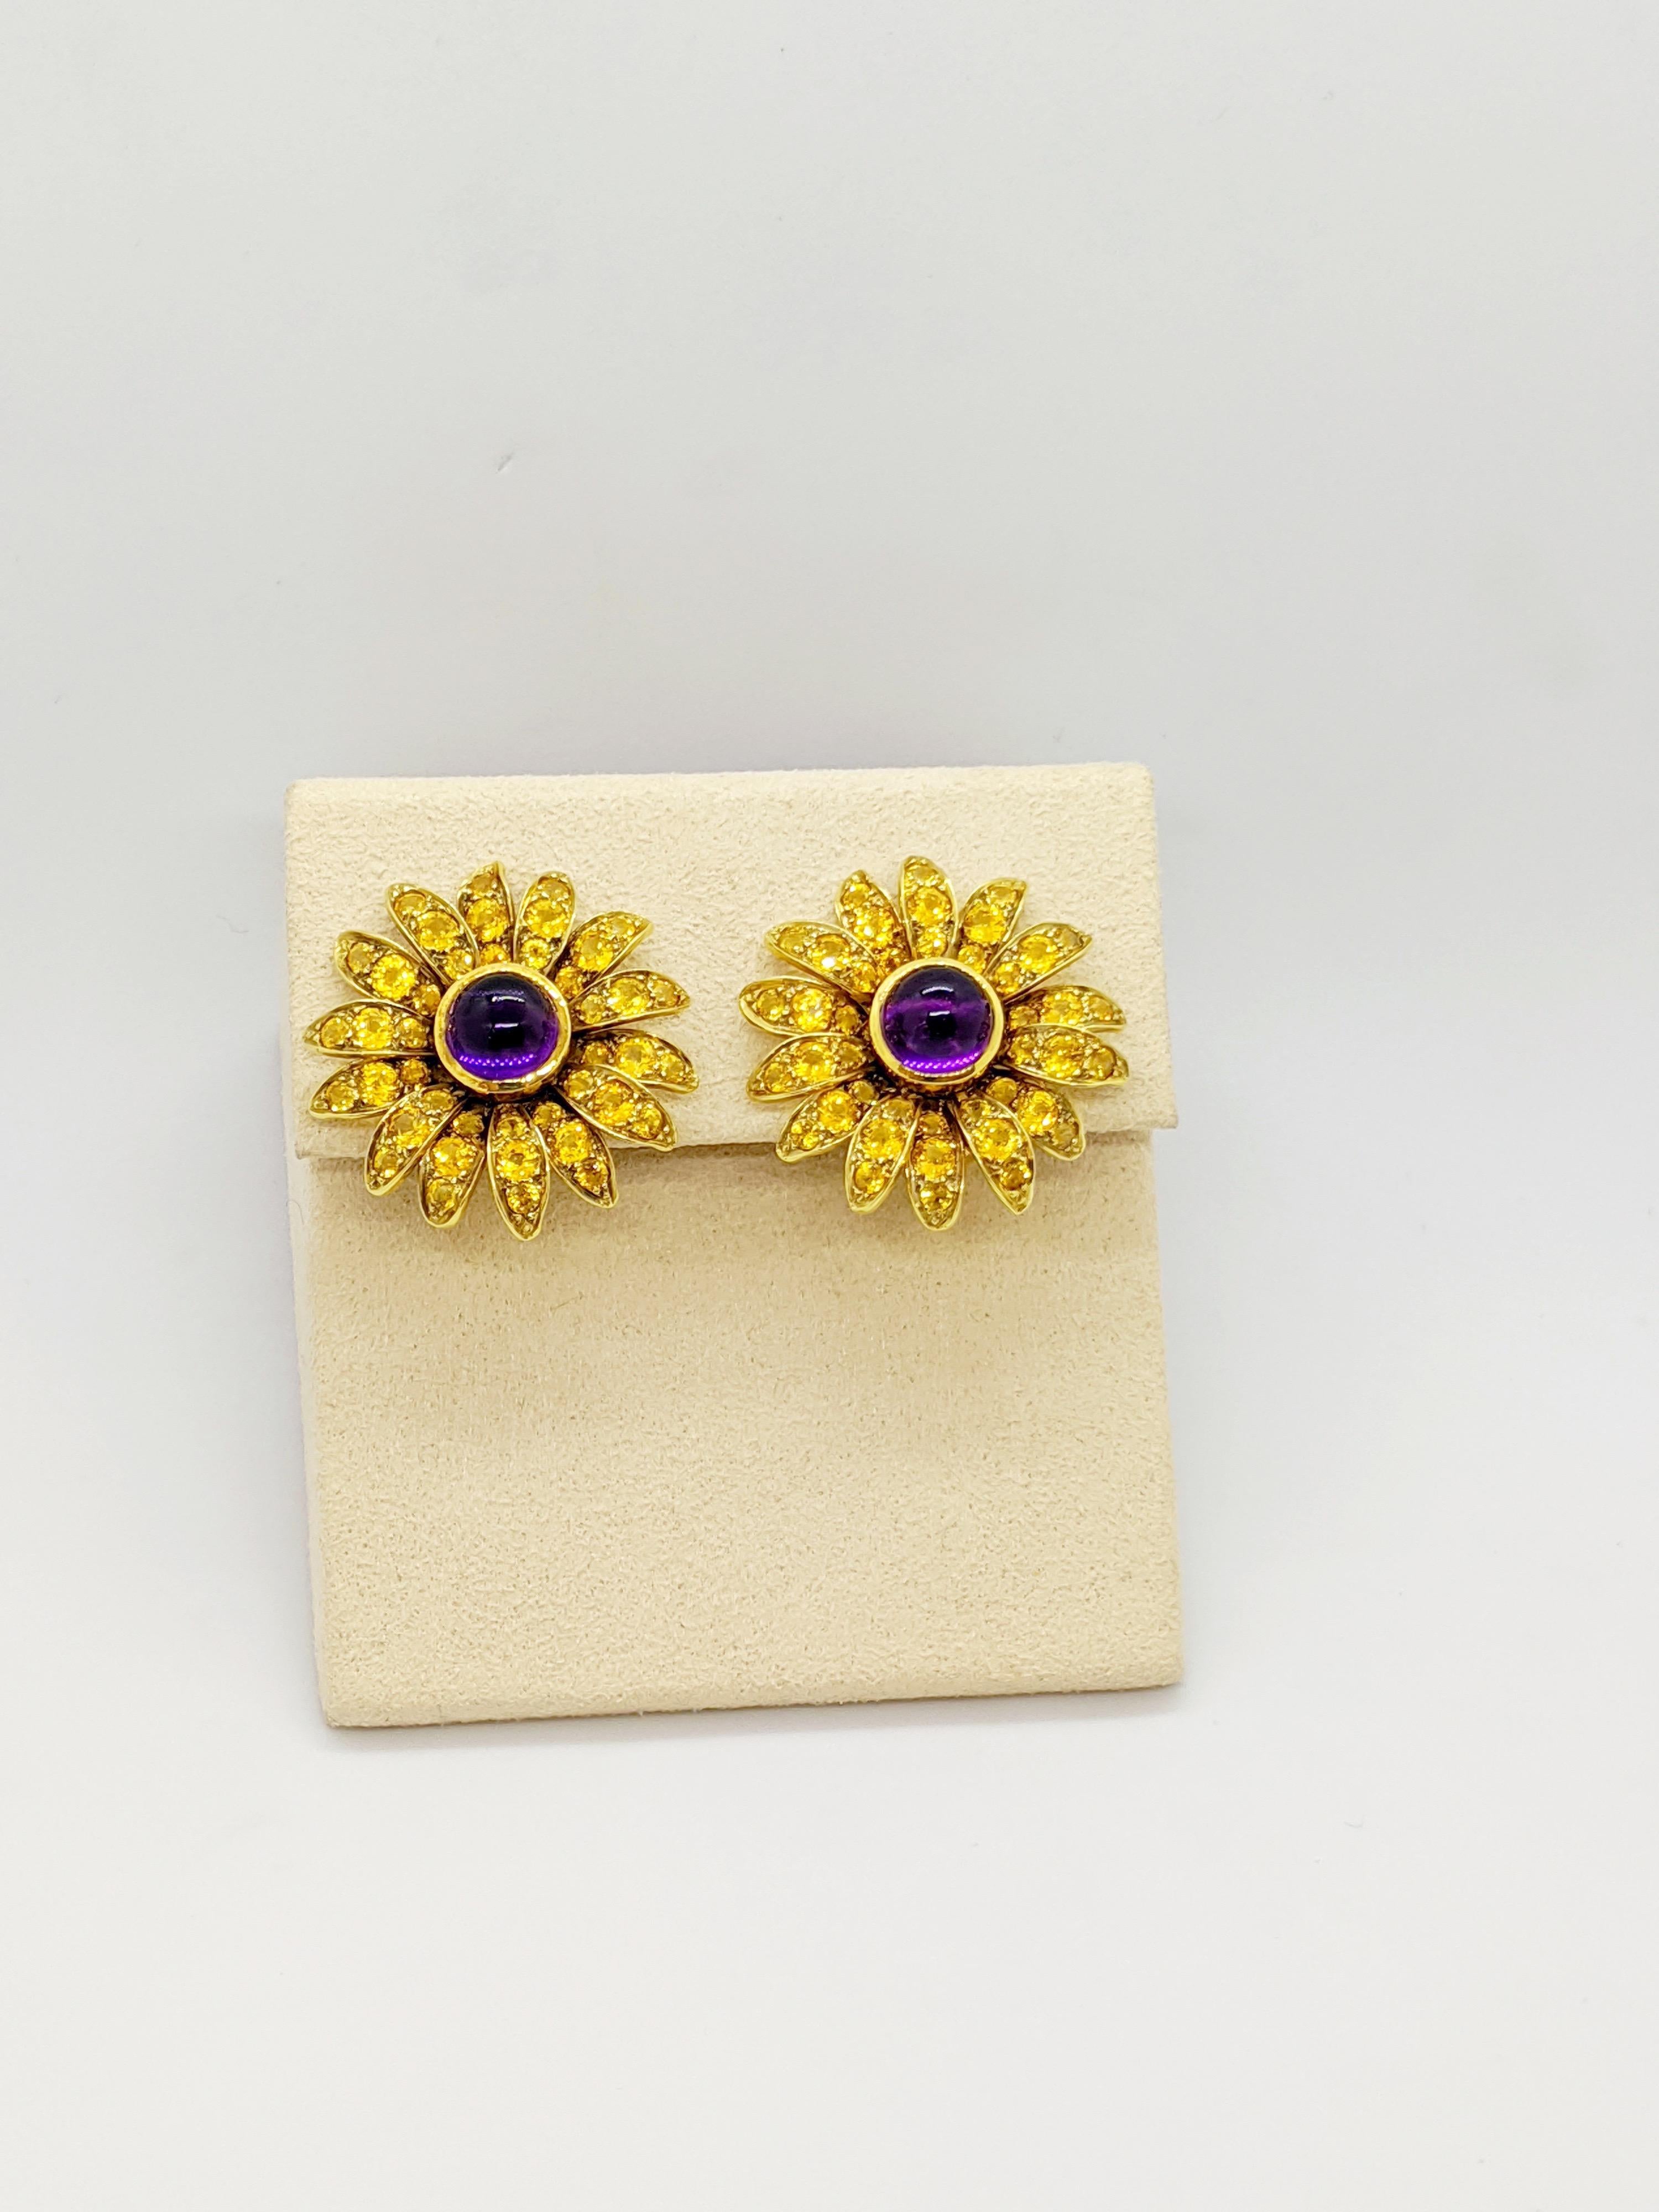 Contemporary Jean Vitau 18 Karat Yellow Gold Sunflower Earrings Yellow Sapphires and Amethyst For Sale